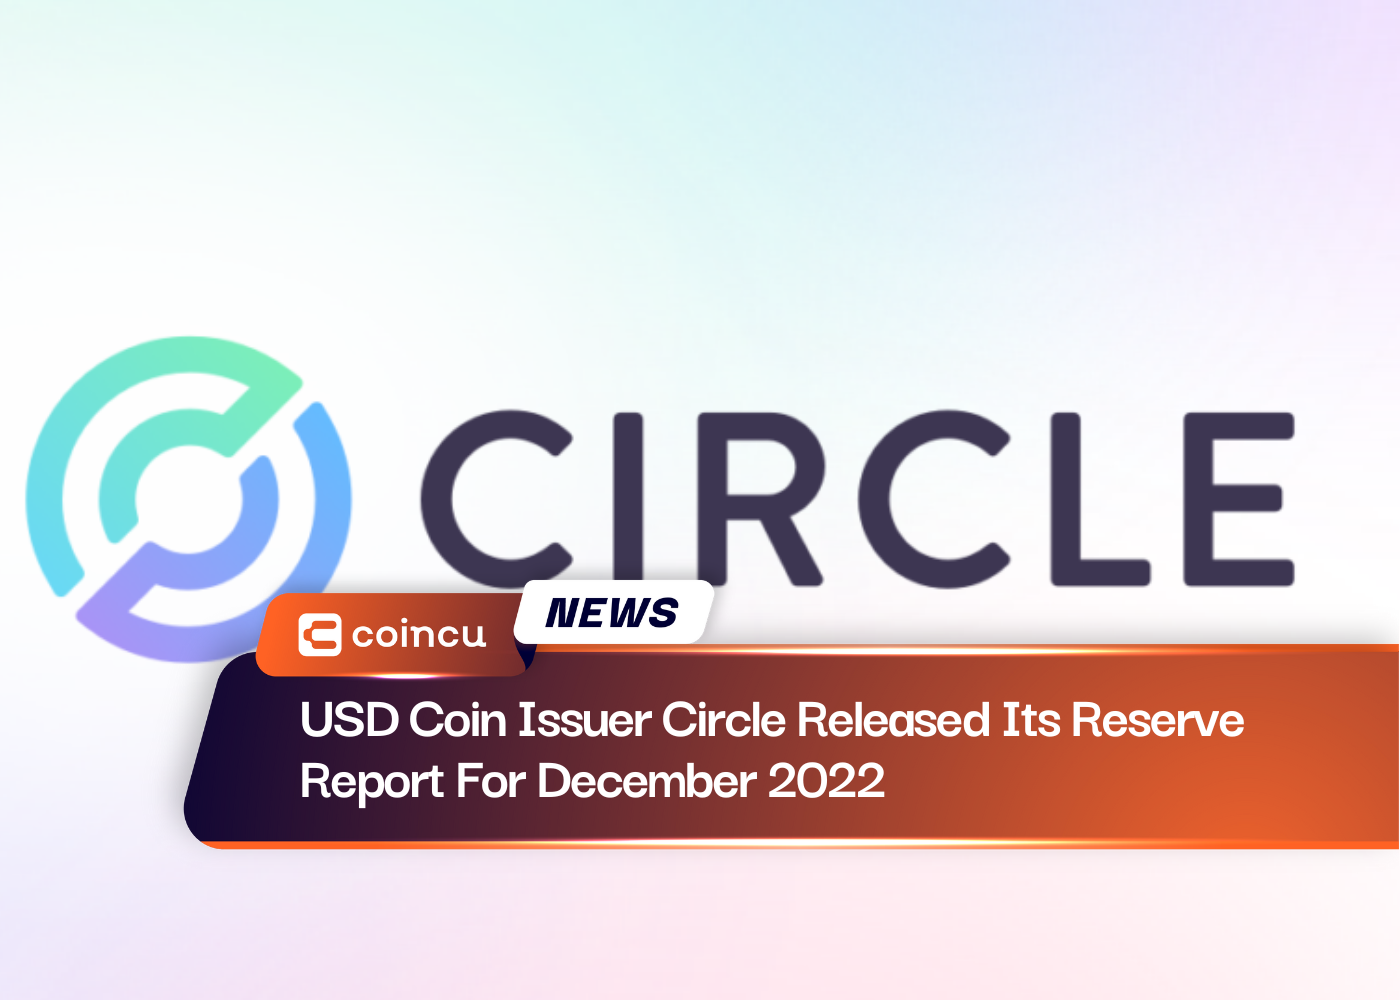 USD Coin Issuer Circle Released Its Reserve Report For December 2022